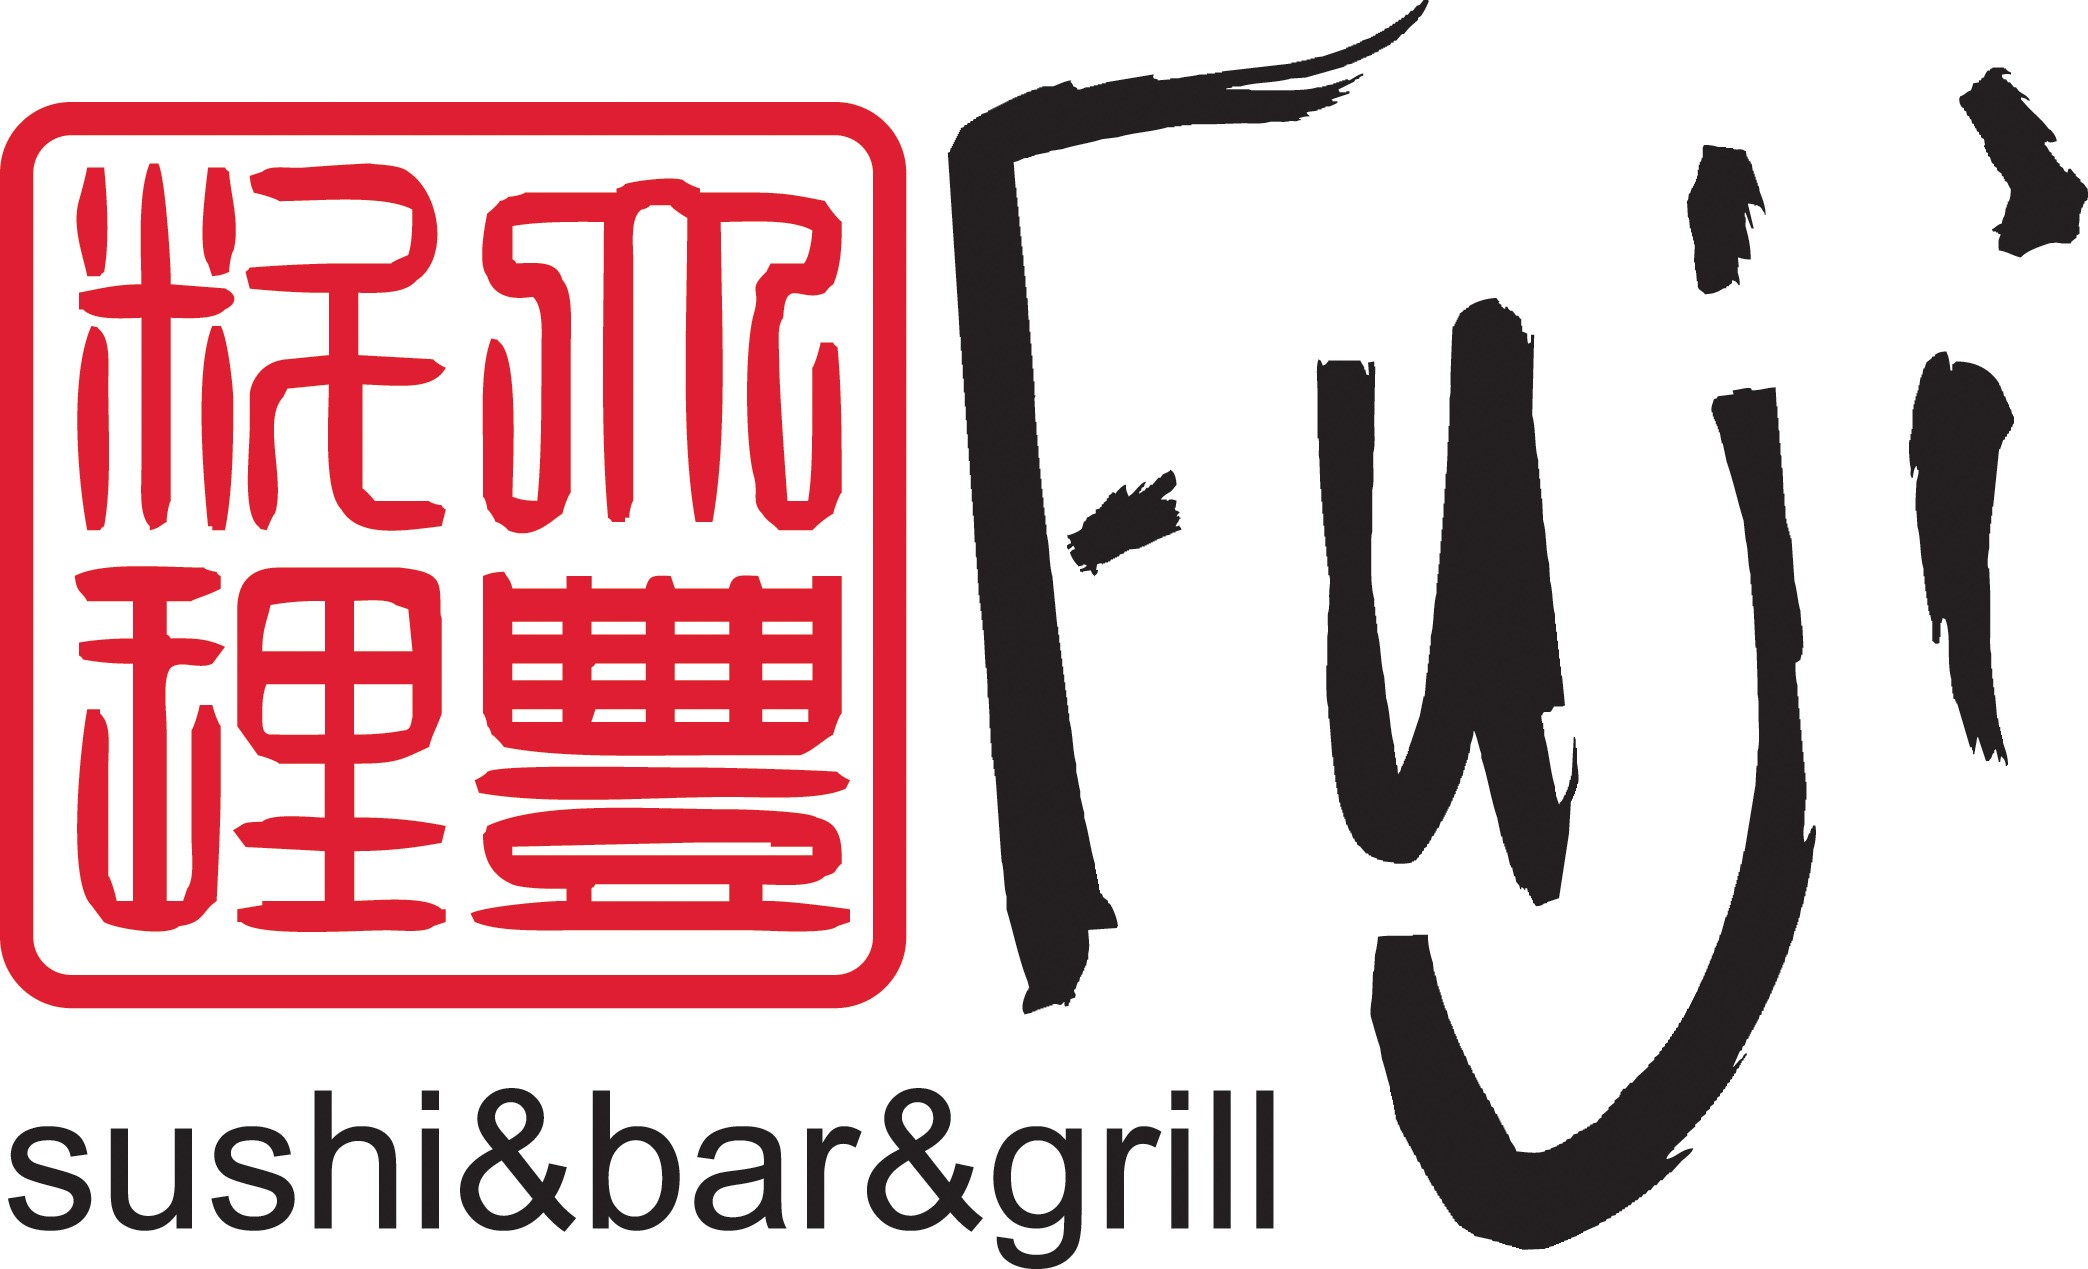 Fuji Sushi Bar and Grill - Belle Hall 644 Long Point Rd,Ste Q